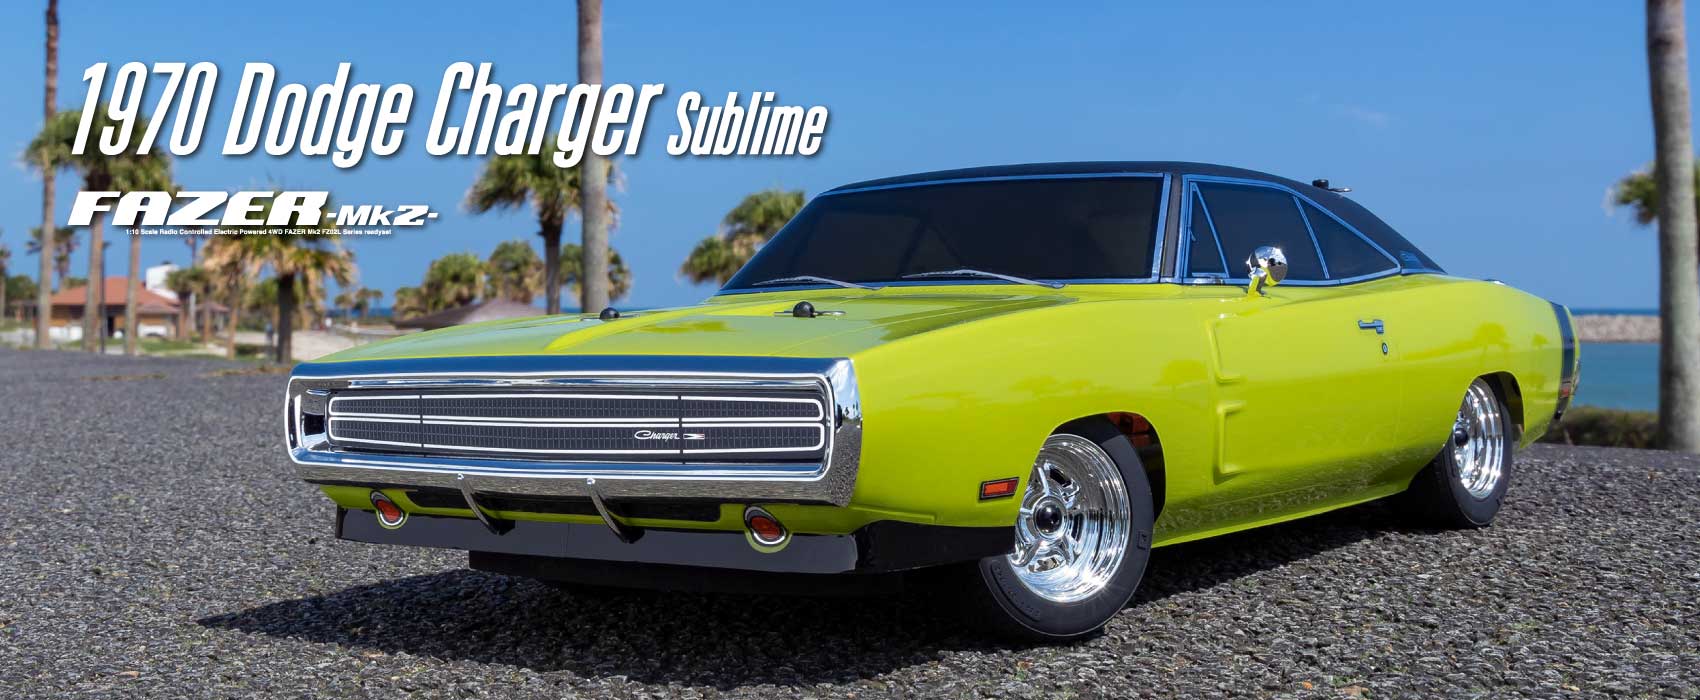 Dodge Charger 1970 Sublime Green Kyosho